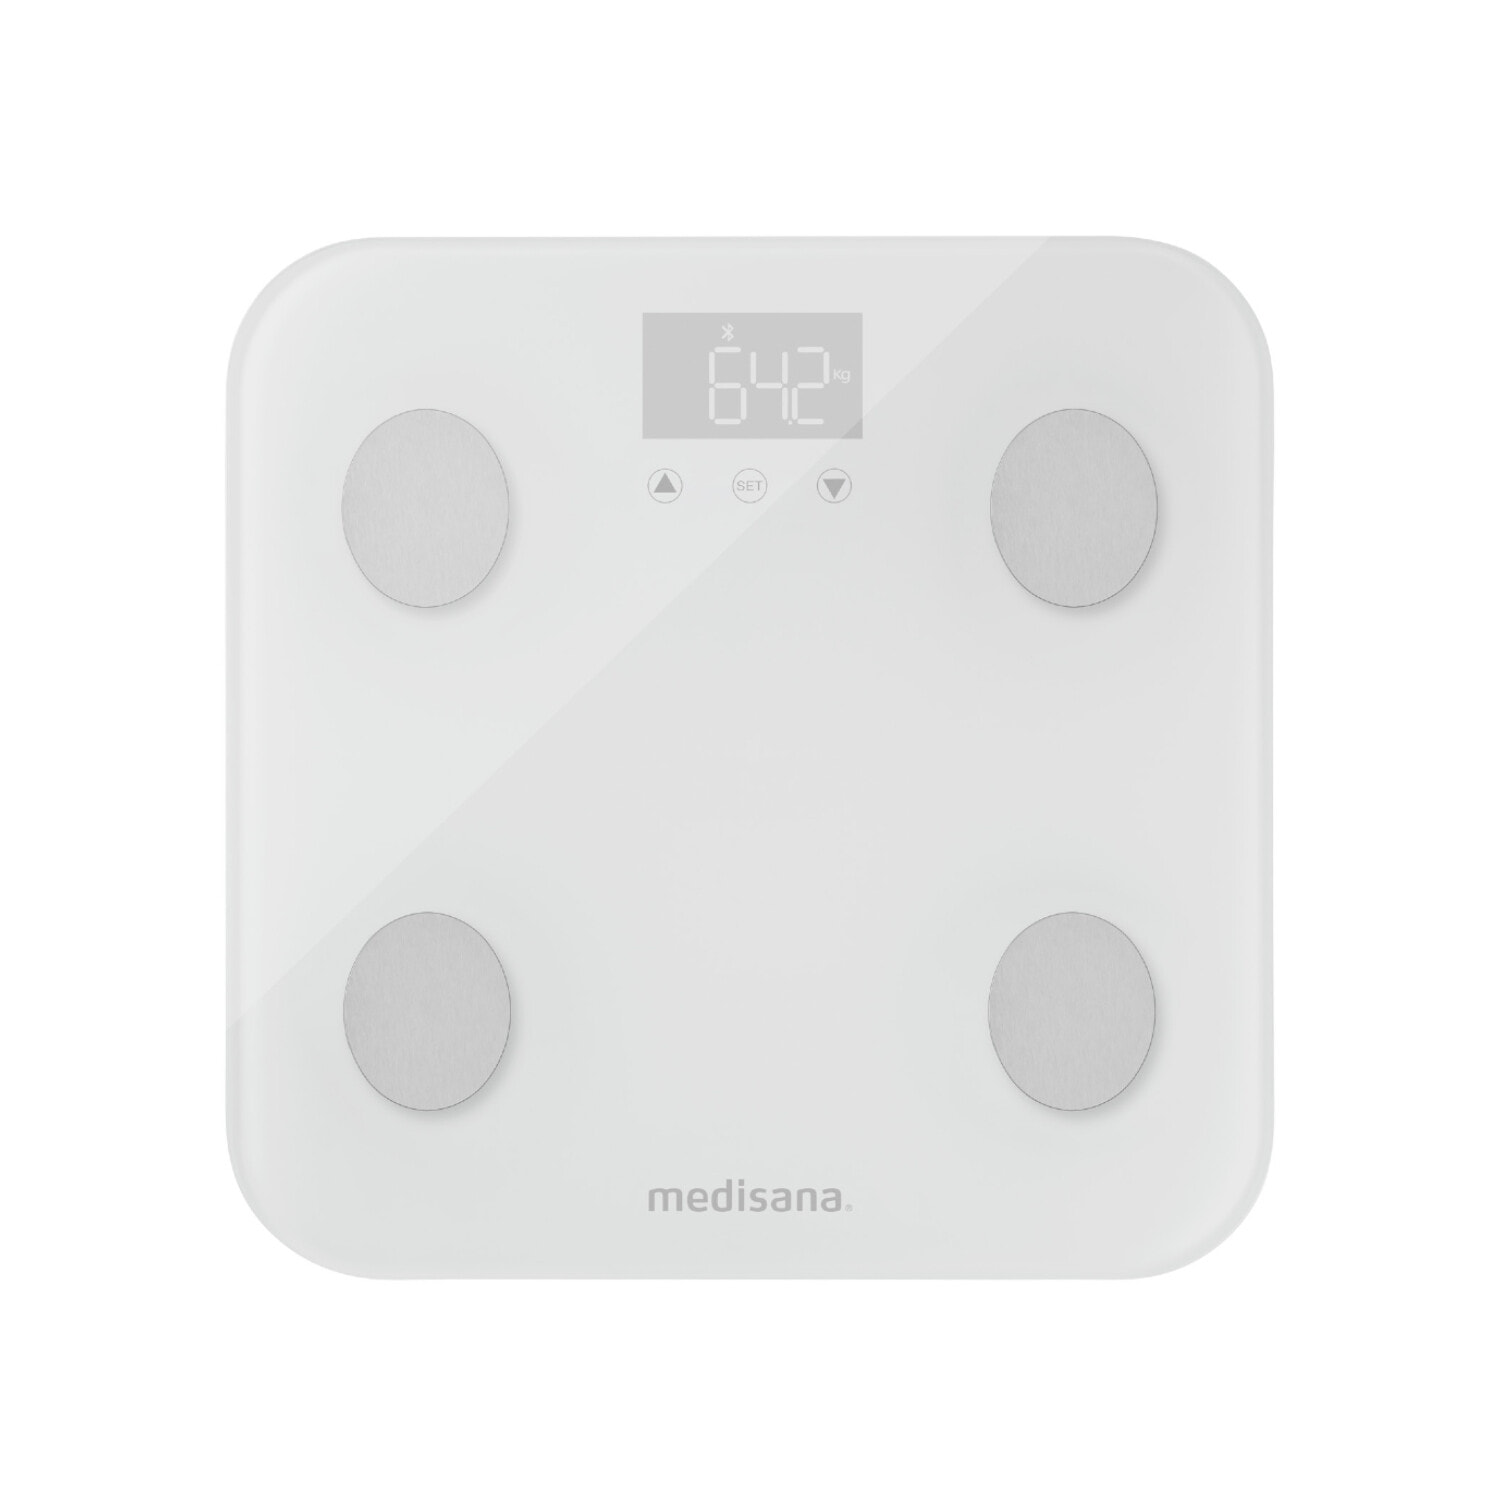 Напольные весы Medisana GmbH Medisana BS 600 connect, Electronic personal scale, White, kg, lb, ST, Square, 8 user(s), AAA